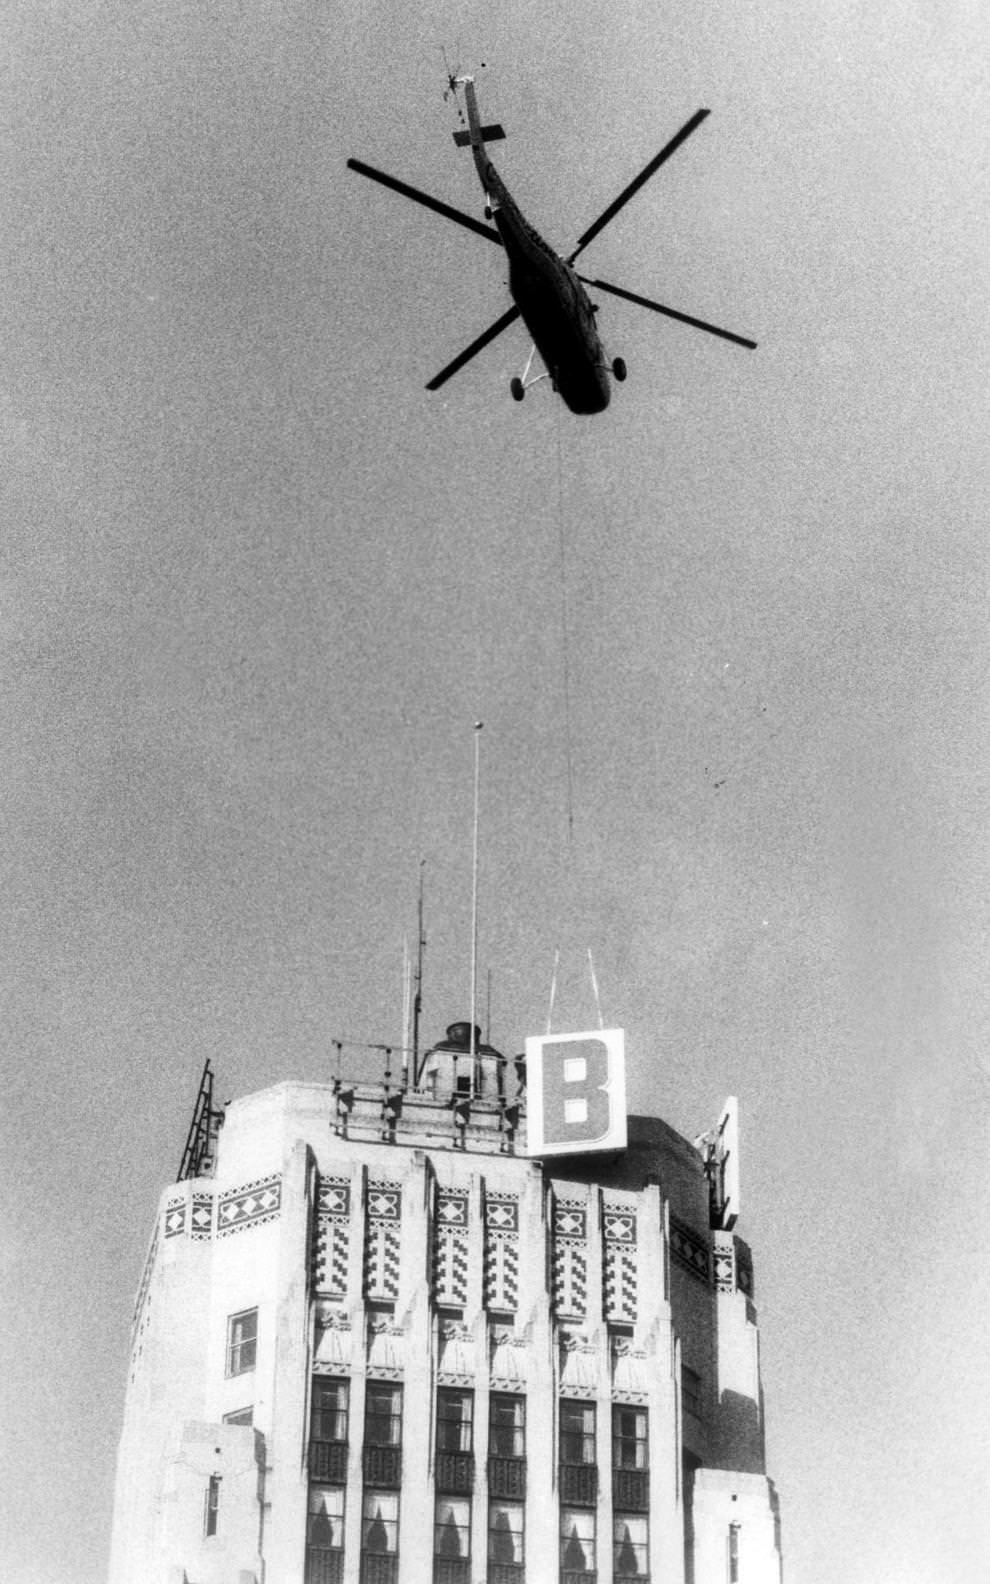 A helicopter removed the letters “CFB” from the Central Fidelity Bank building at Third and Broad streets in downtown Richmond, 1986.